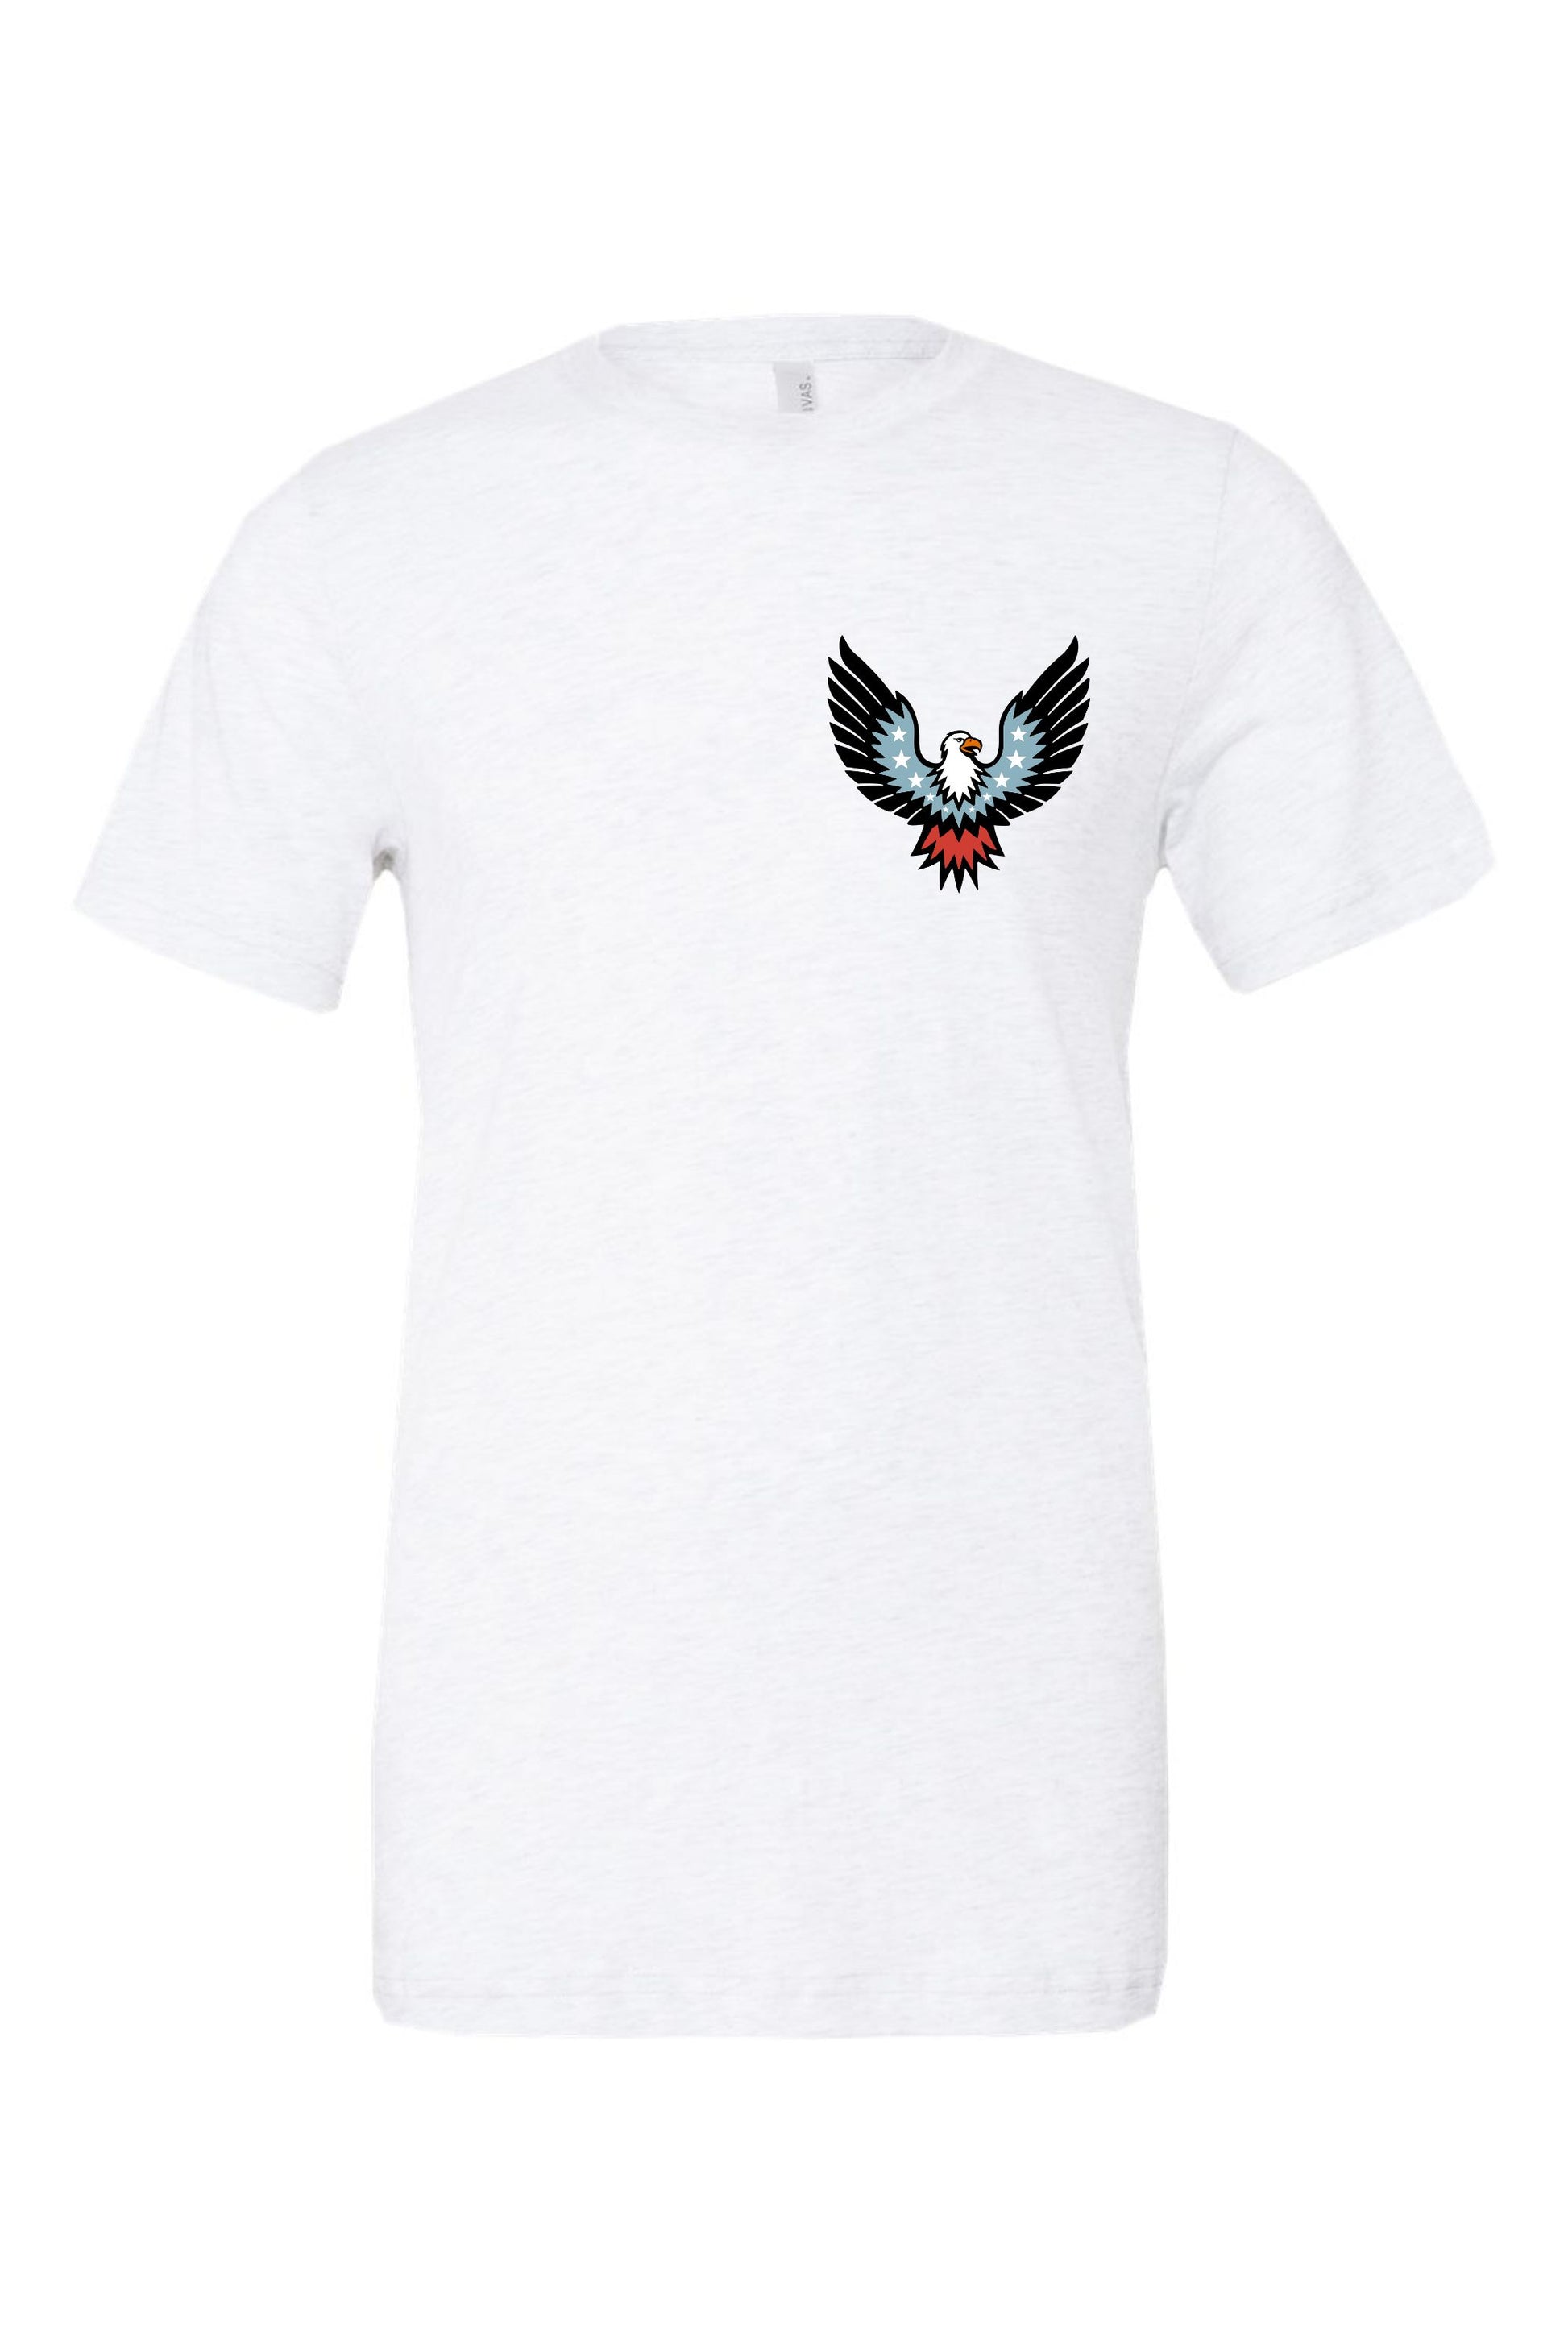 Freedom Eagle | Adult Tee | RTS-Sister Shirts-Sister Shirts, Cute & Custom Tees for Mama & Littles in Trussville, Alabama.